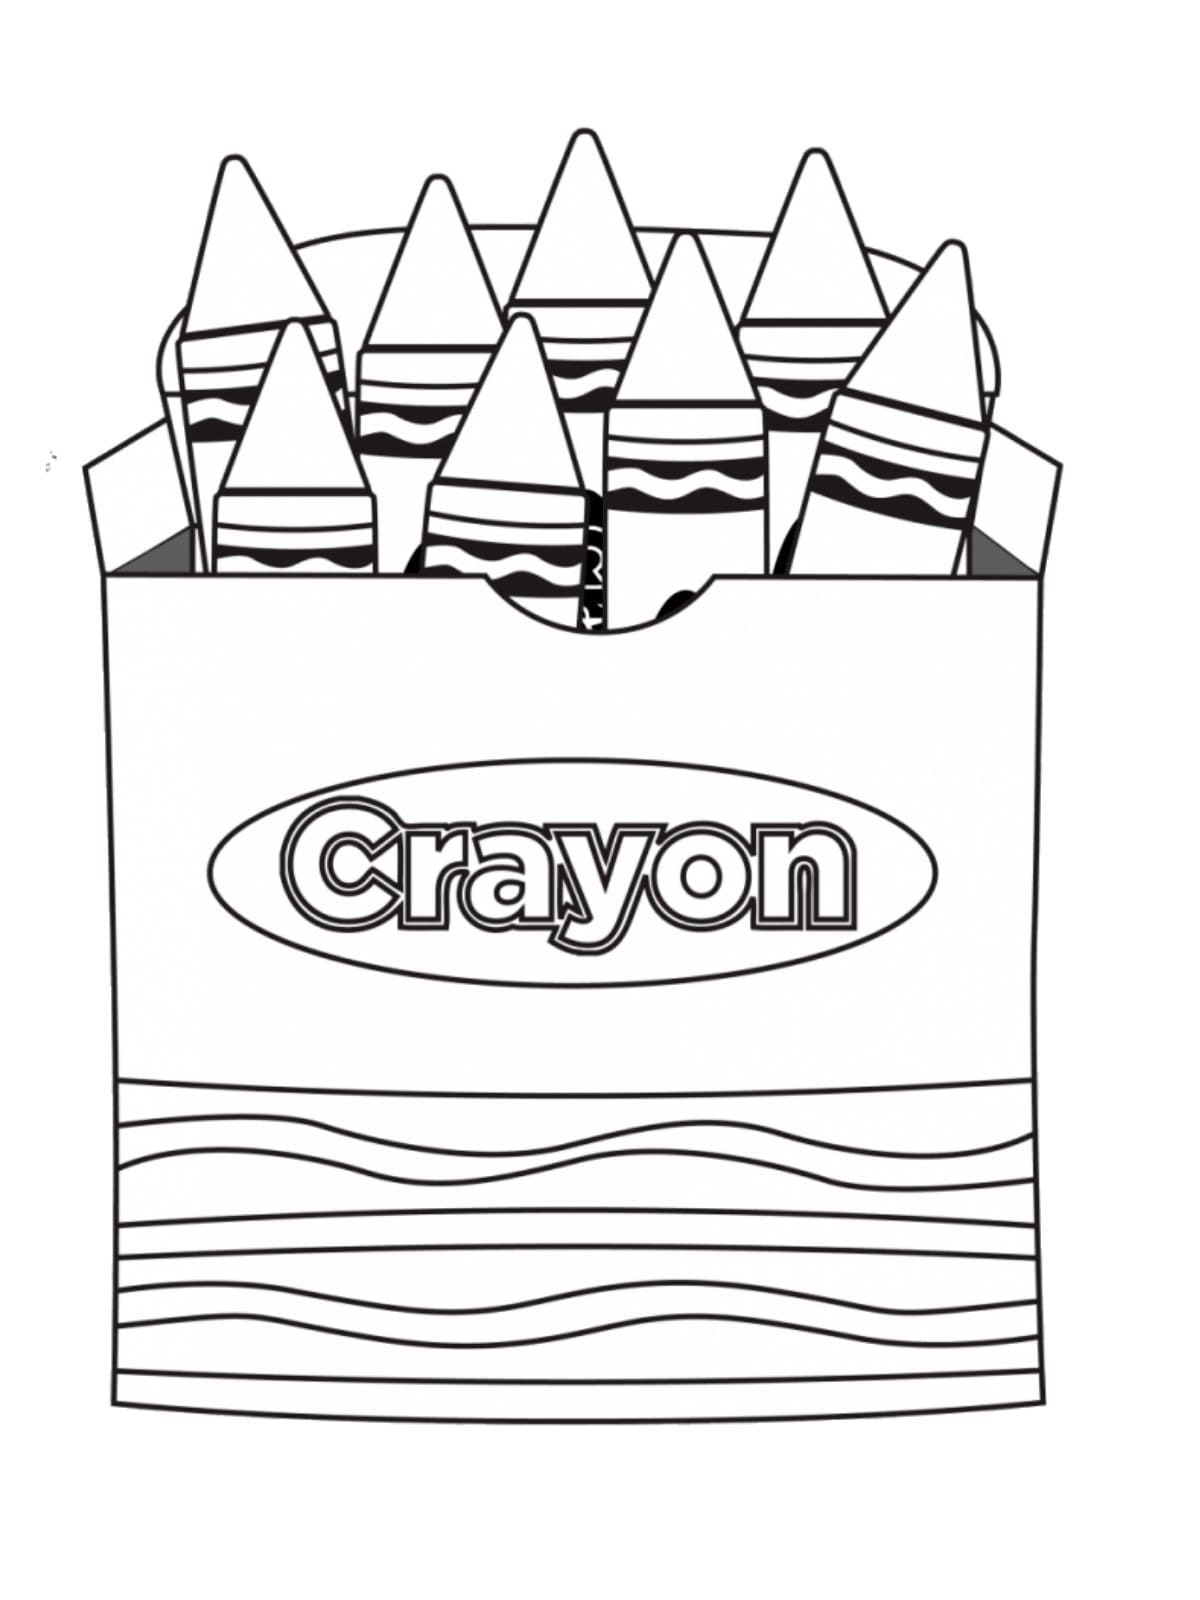 A Crayon Box Coloring Page - Free Printable Coloring Pages for Kids